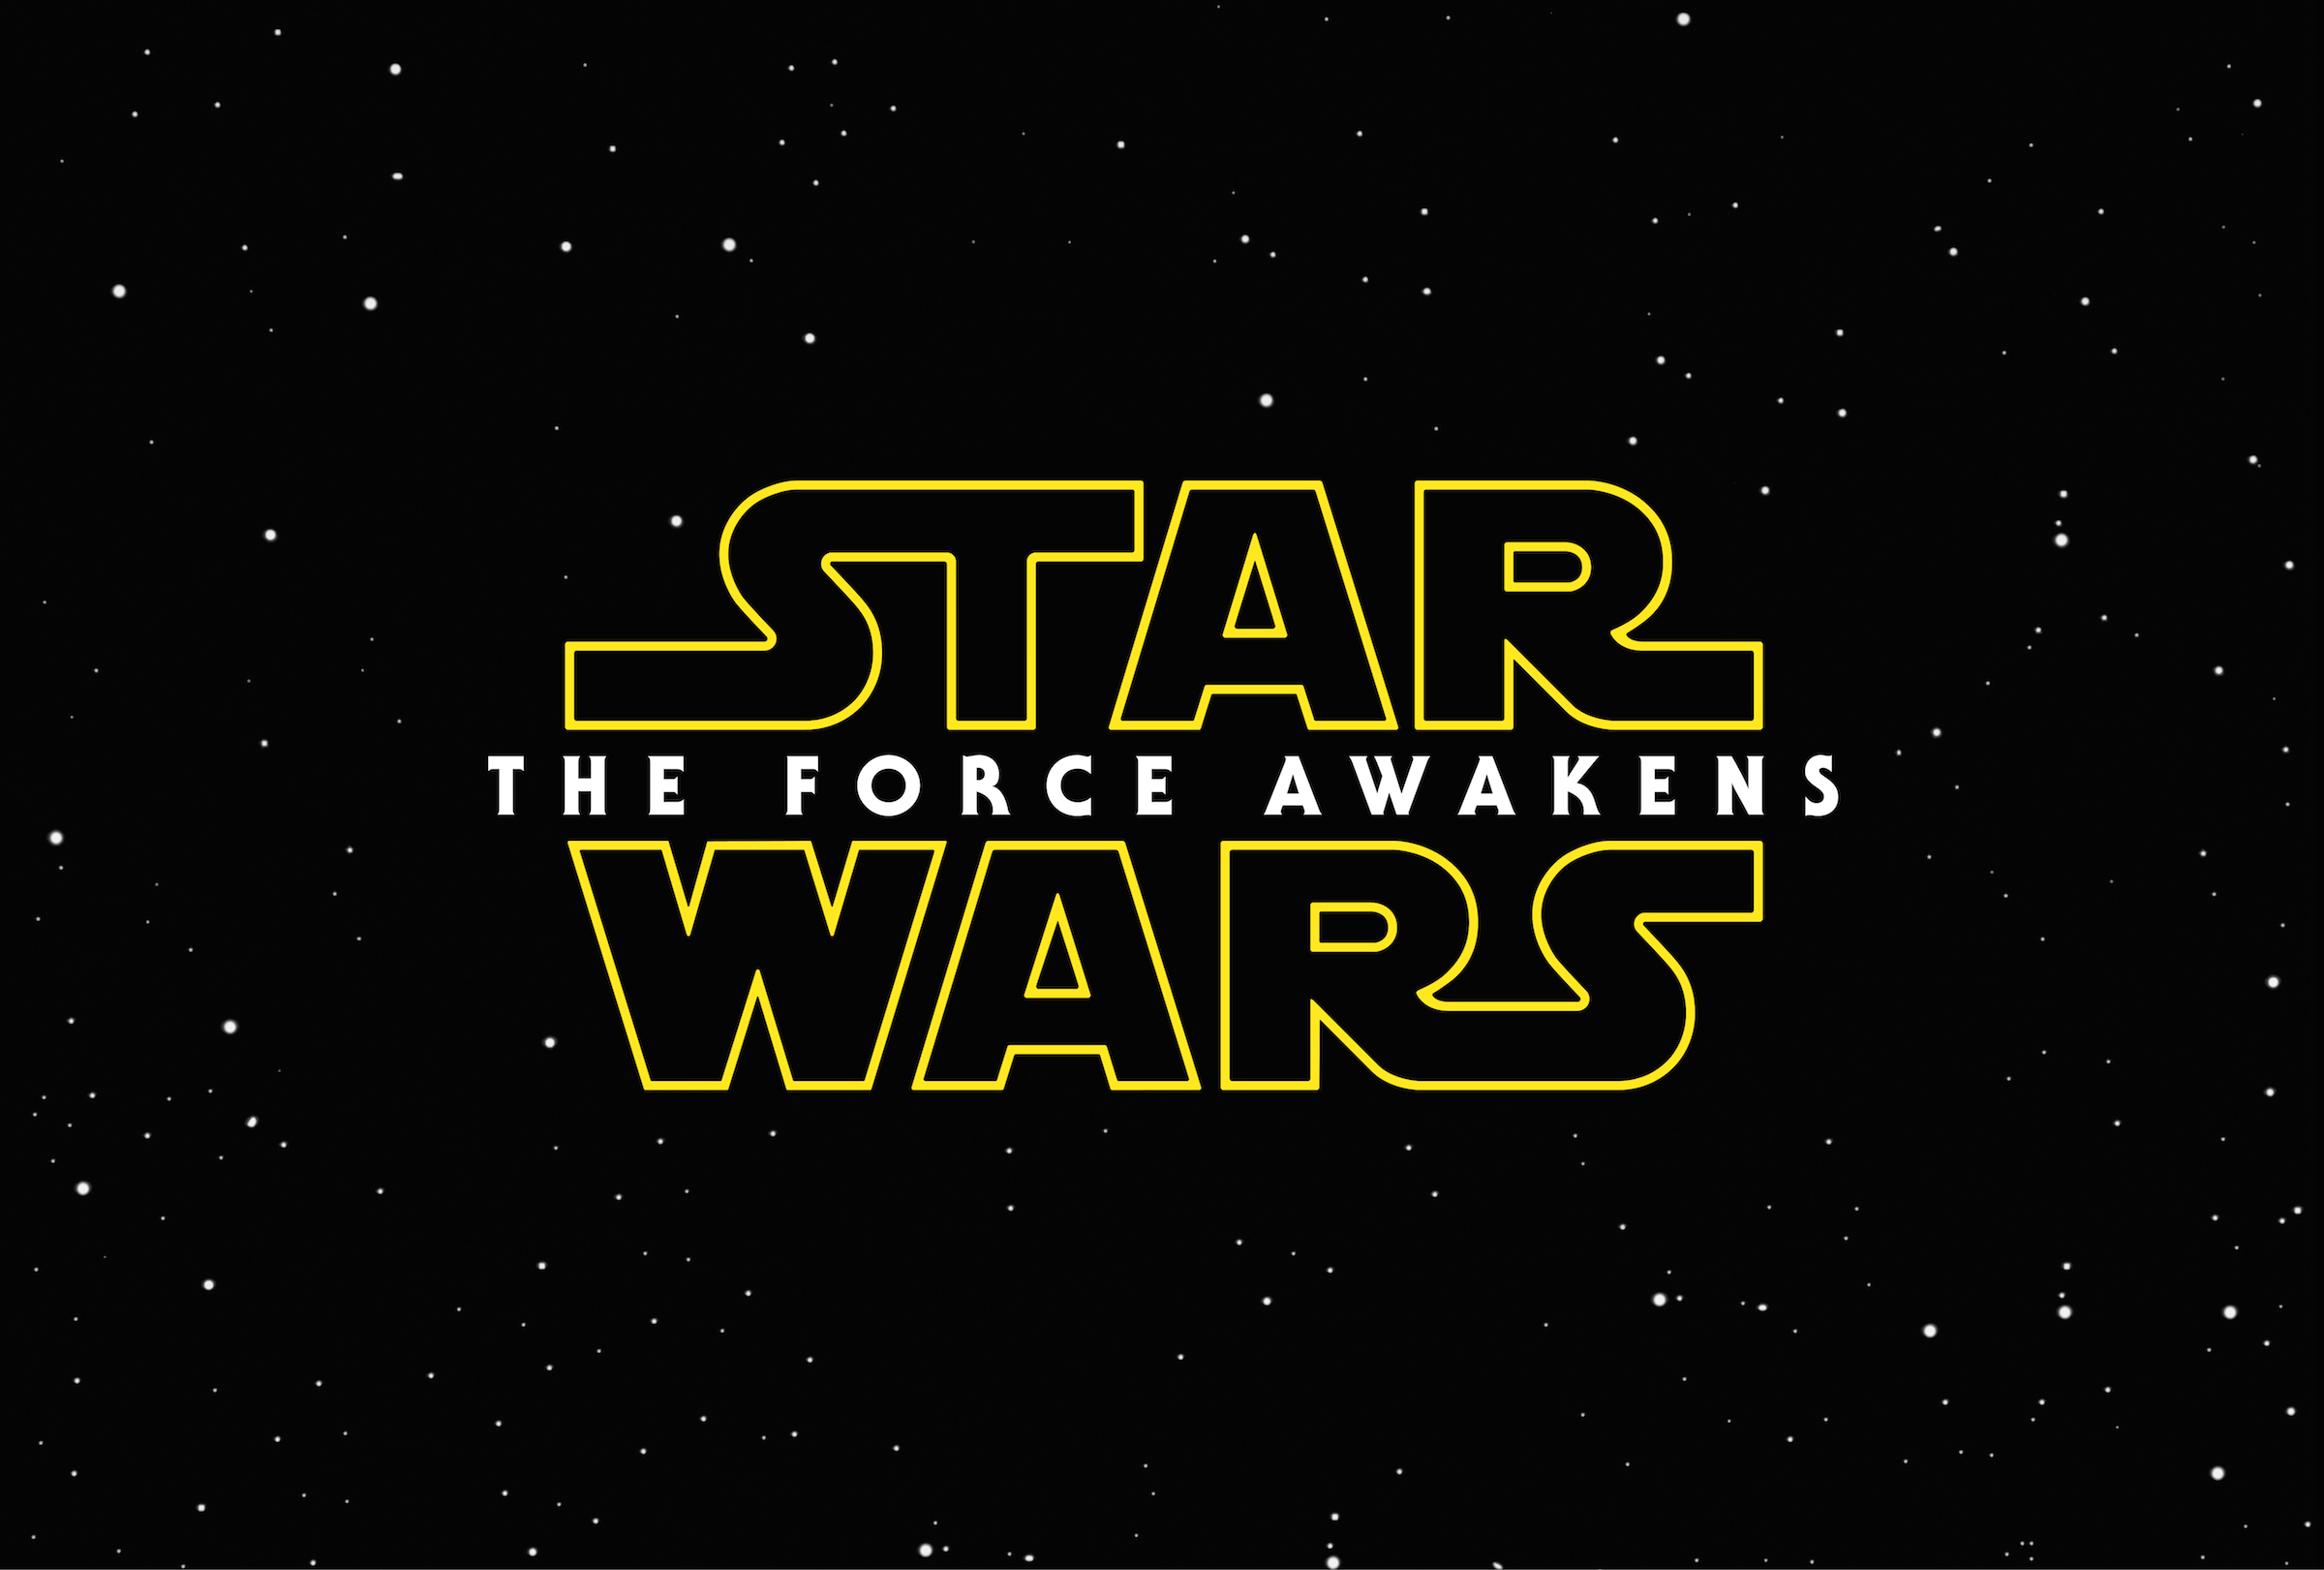 El Capitan Theatre to Present Midnight Showing of Star Wars: The Force Awakens 12/18